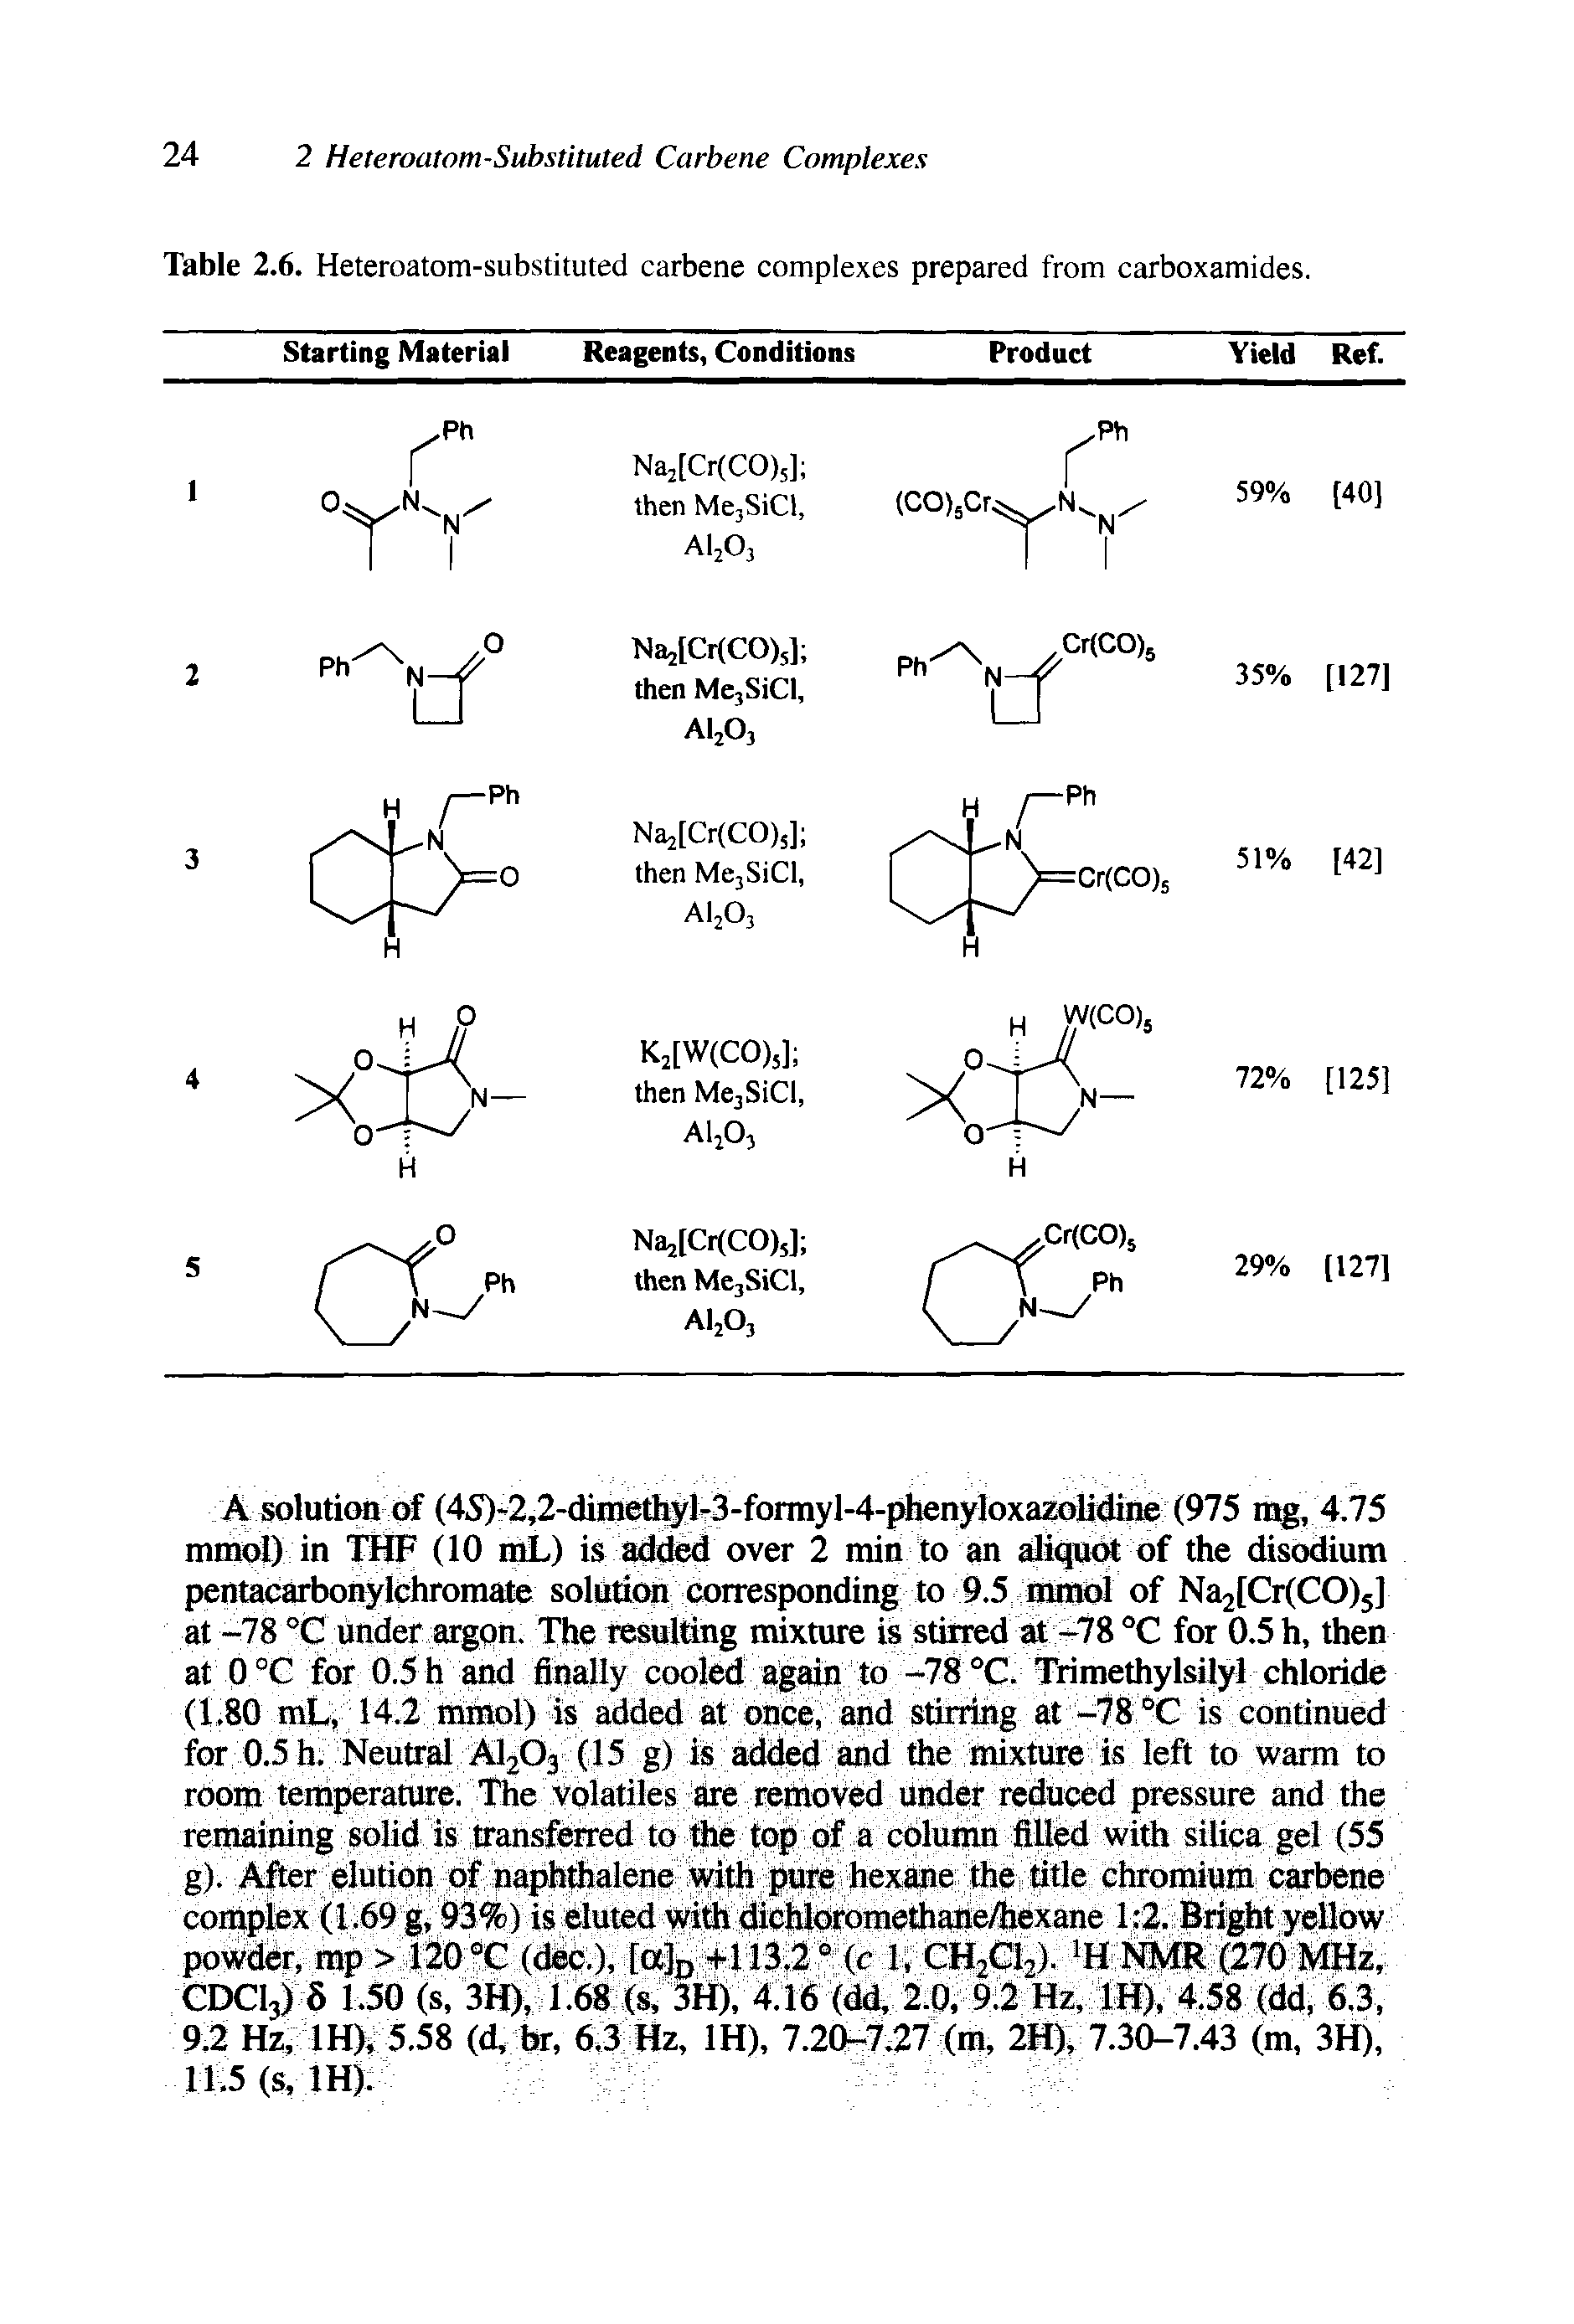 Table 2.6. Heteroatom-substituted carbene complexes prepared from carboxamides.